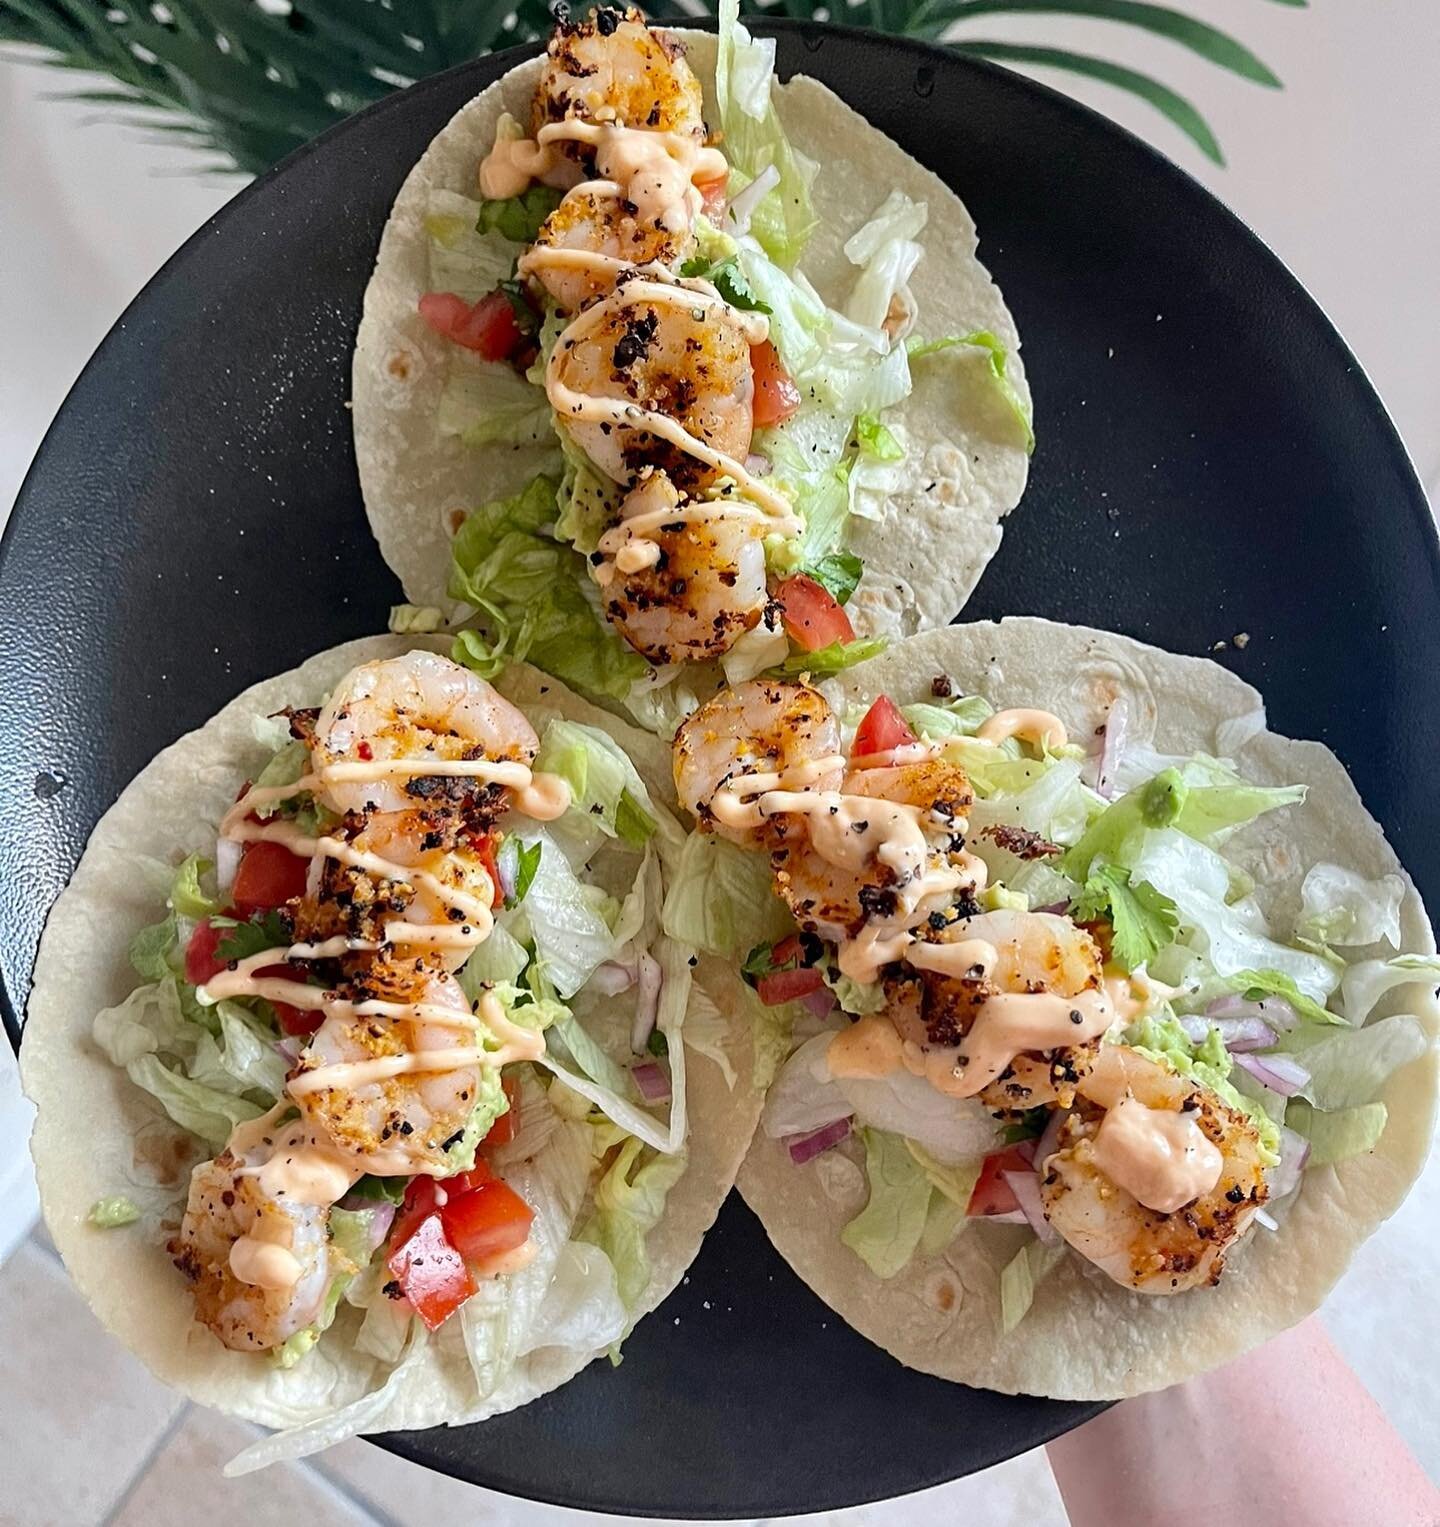 YOU GUYS NEED TO TRY MY PRAWN TACO RECIPE!!!!! 🌮 

This is one of the best recipes I have came up with and is very macro friendly 🤤 

You could make with fish, pulled beef, pulled pork or chicken! I have done them and they are great.

Swipe for ing